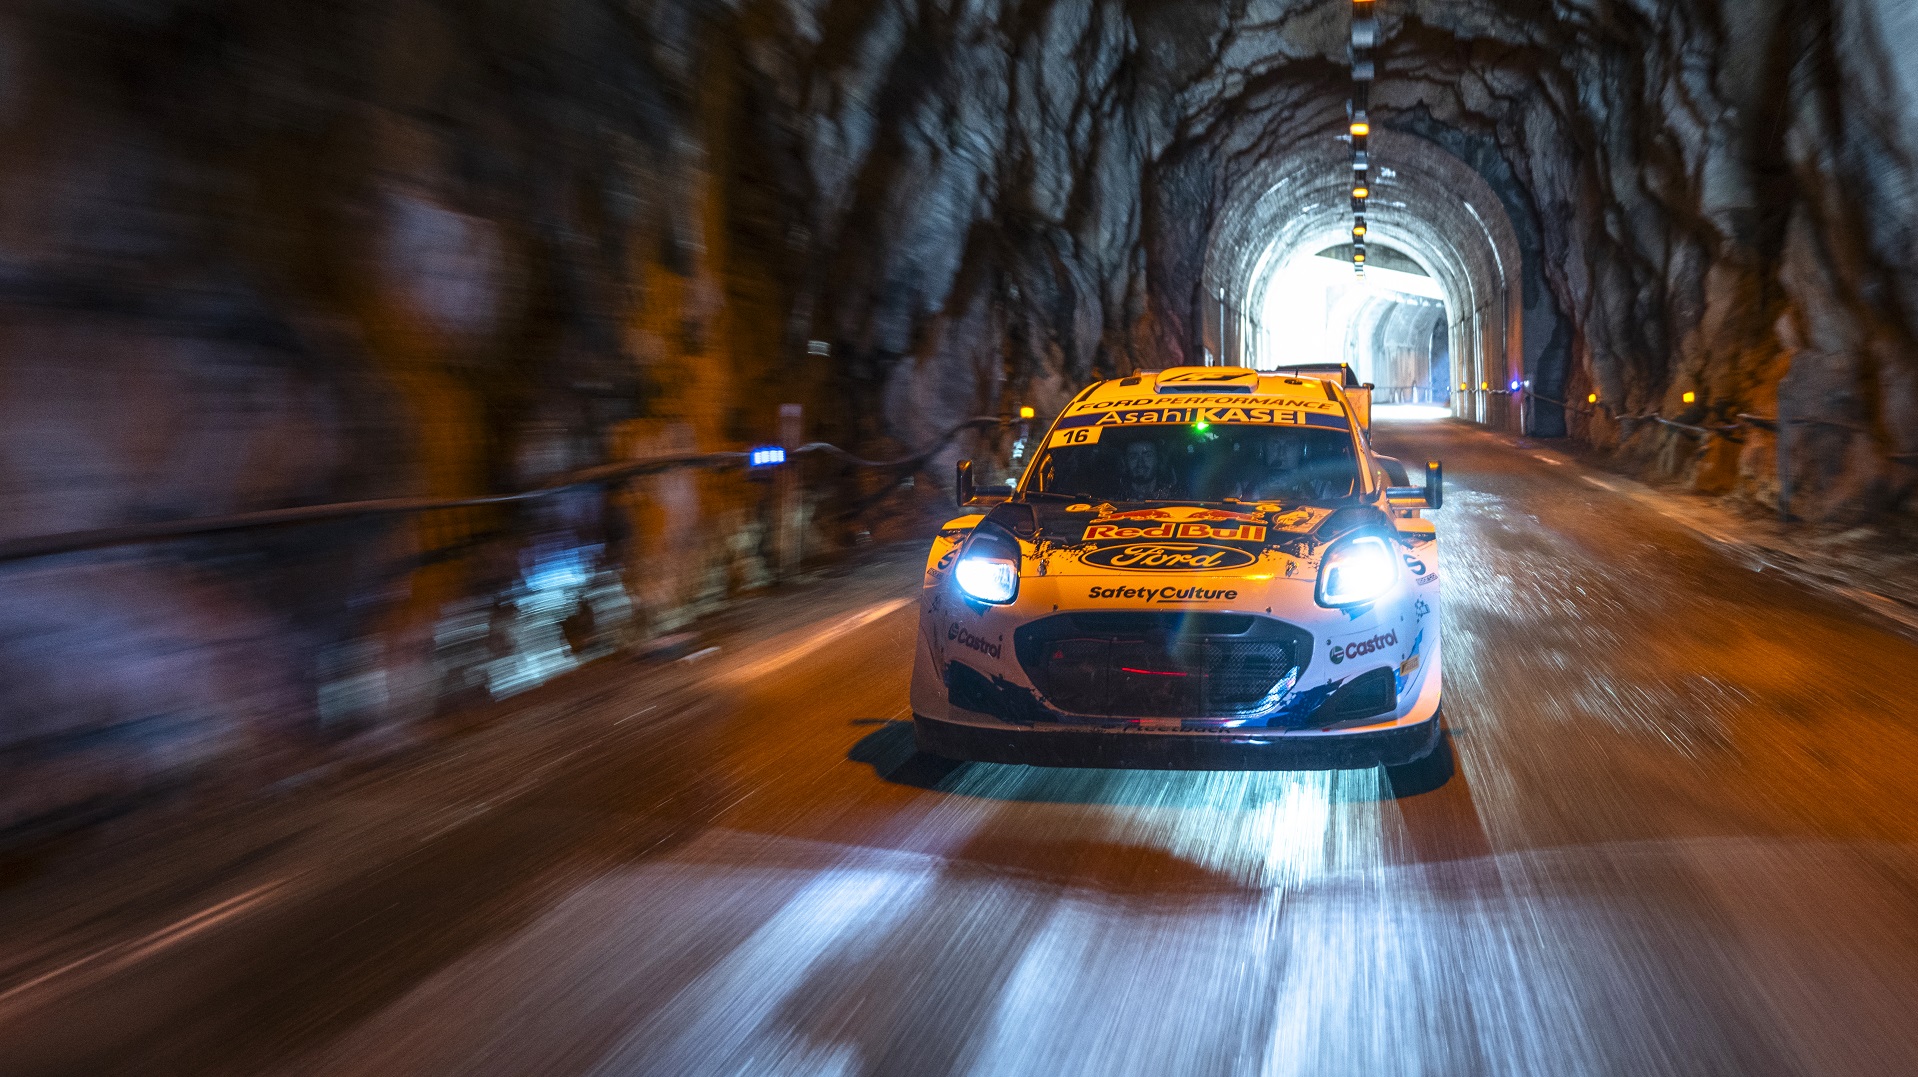 Adrien Fourmaux (FRA) Alexandre Coria (FRA) Of team M-SPORT FORD WORLD RALLY TEAM are seen on roadsection during the World Rally Championship Monte-Carlo in Gap, France on 26.January.2024 // Jaanus Ree / Red Bull Content Pool // SI202401270370 // Usage for editorial use only //